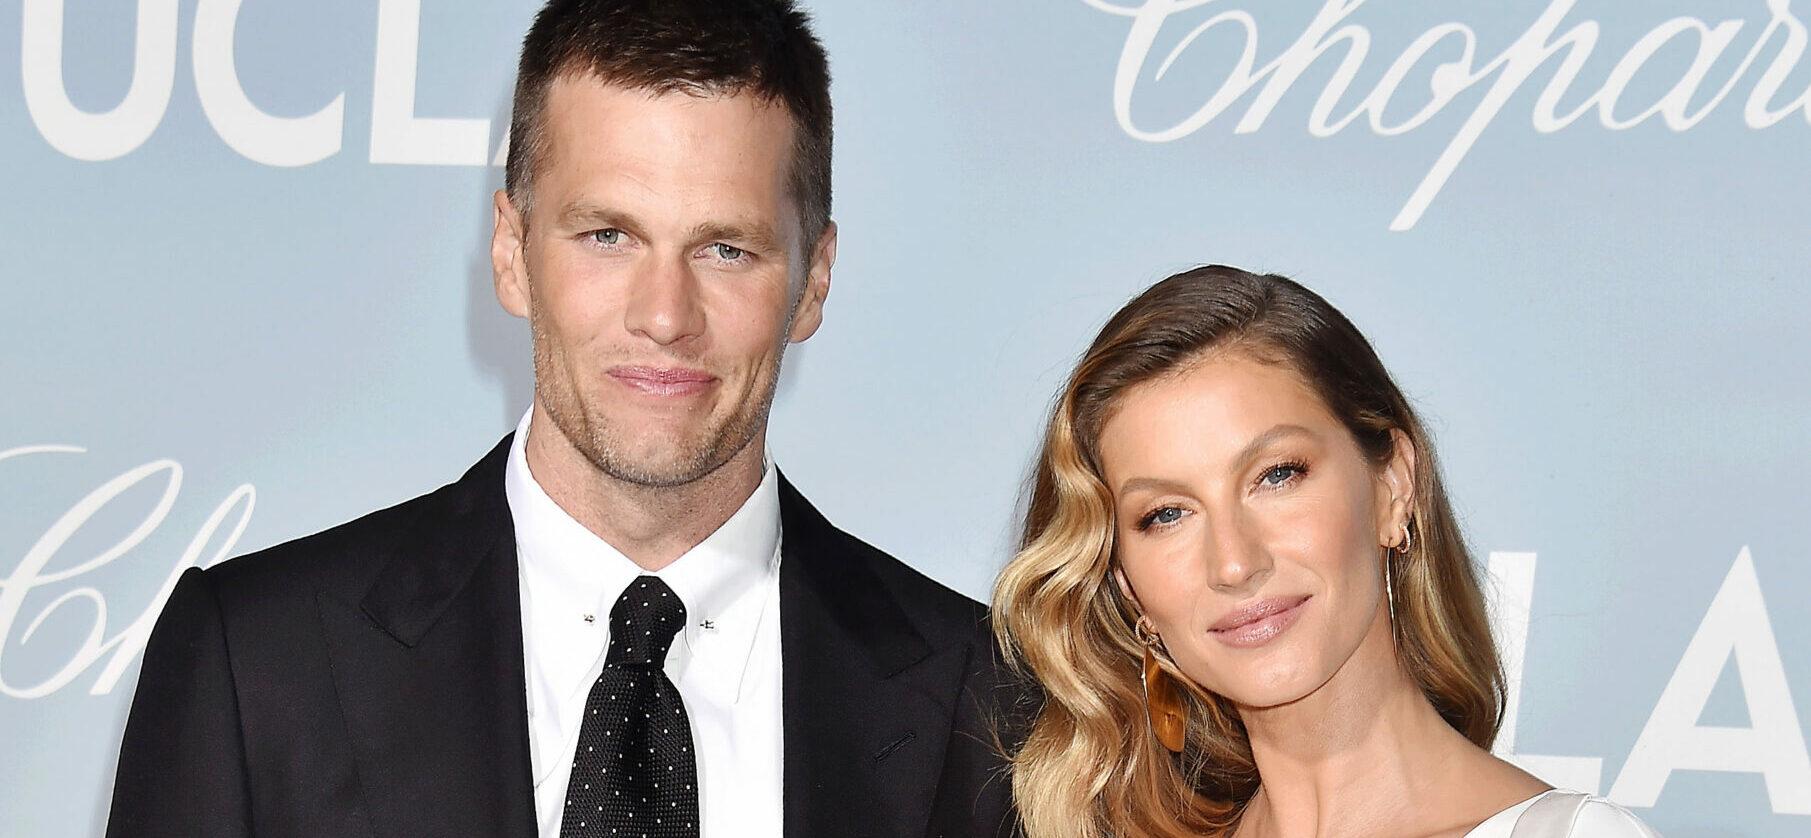 This Is What Gisele Bündchen Gave Tom Brady For Valentine’s Day!